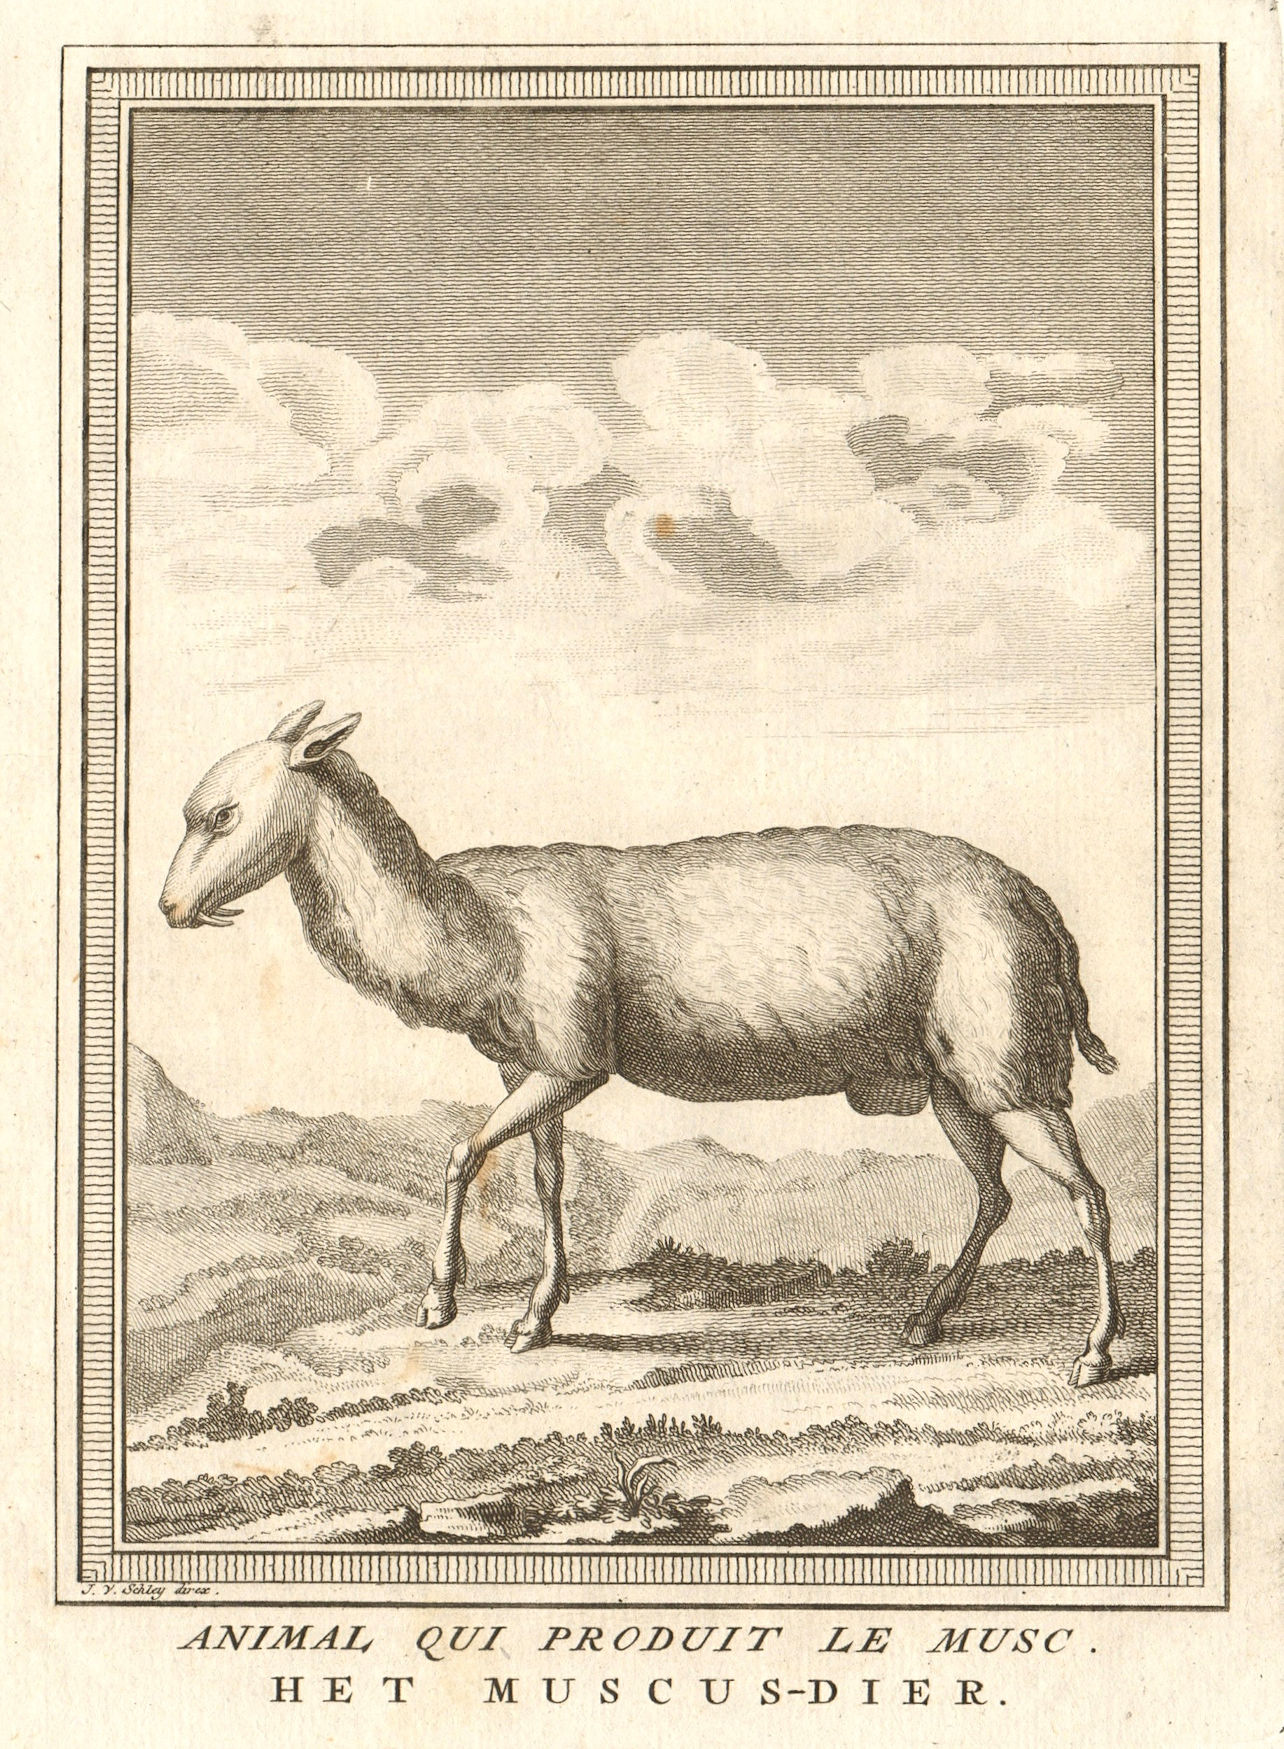 'Animal qui produit le Musc'. Musk deer. South Asia. SCHLEY 1755 old print